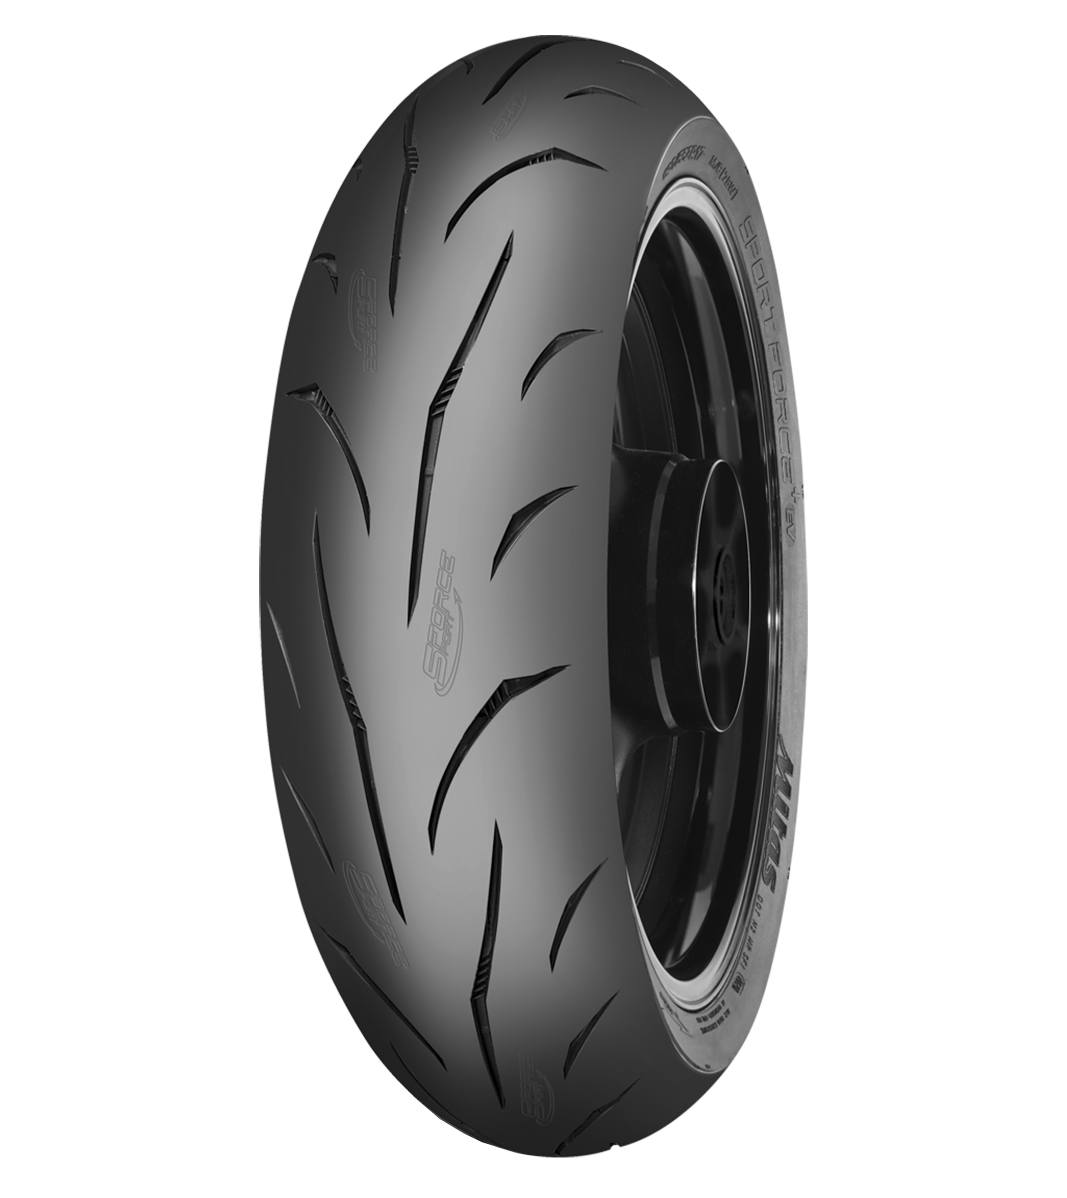 Mitas SPORT FORCE+ EV 180/55ZR17 Motorcycle Sport On-Road EVOLUTION (73W) No Stripe Tubeless Rear Tire, 603827, 180/55ZR17, Motorcycle Sport, On-Road, Rear, Sport, Sport Force+ EV, Sport Touring, Tires - Imported and distributed in North &amp; South America by Lindeco Genuine Powersports - Premier Powersports Equipment and Accessories for Motorcycle Enthusiasts, Professional Riders and Dealers.